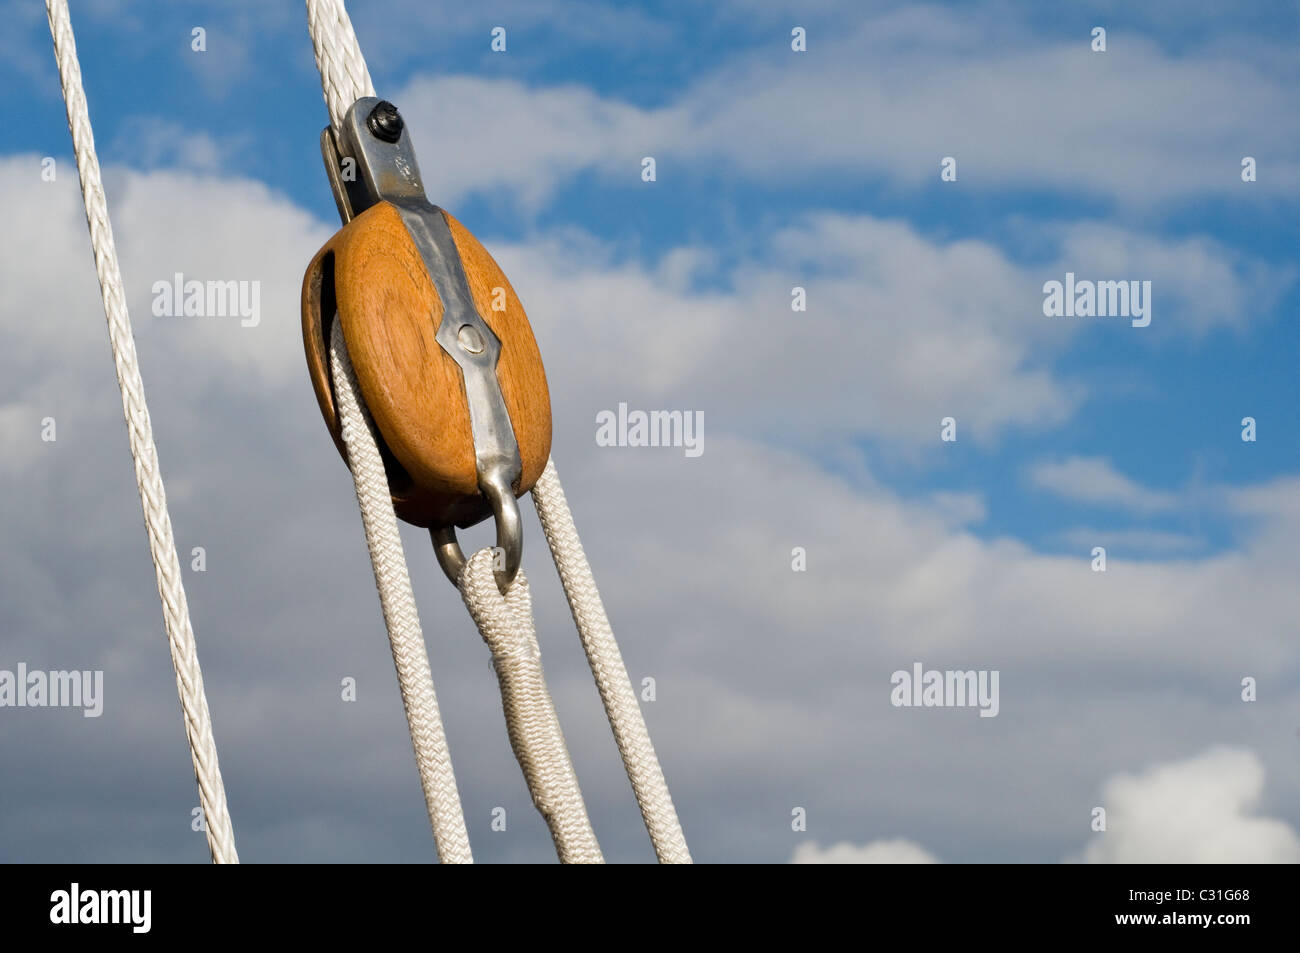 A wooden pulley and ropes on a sailing yacht Stock Photo